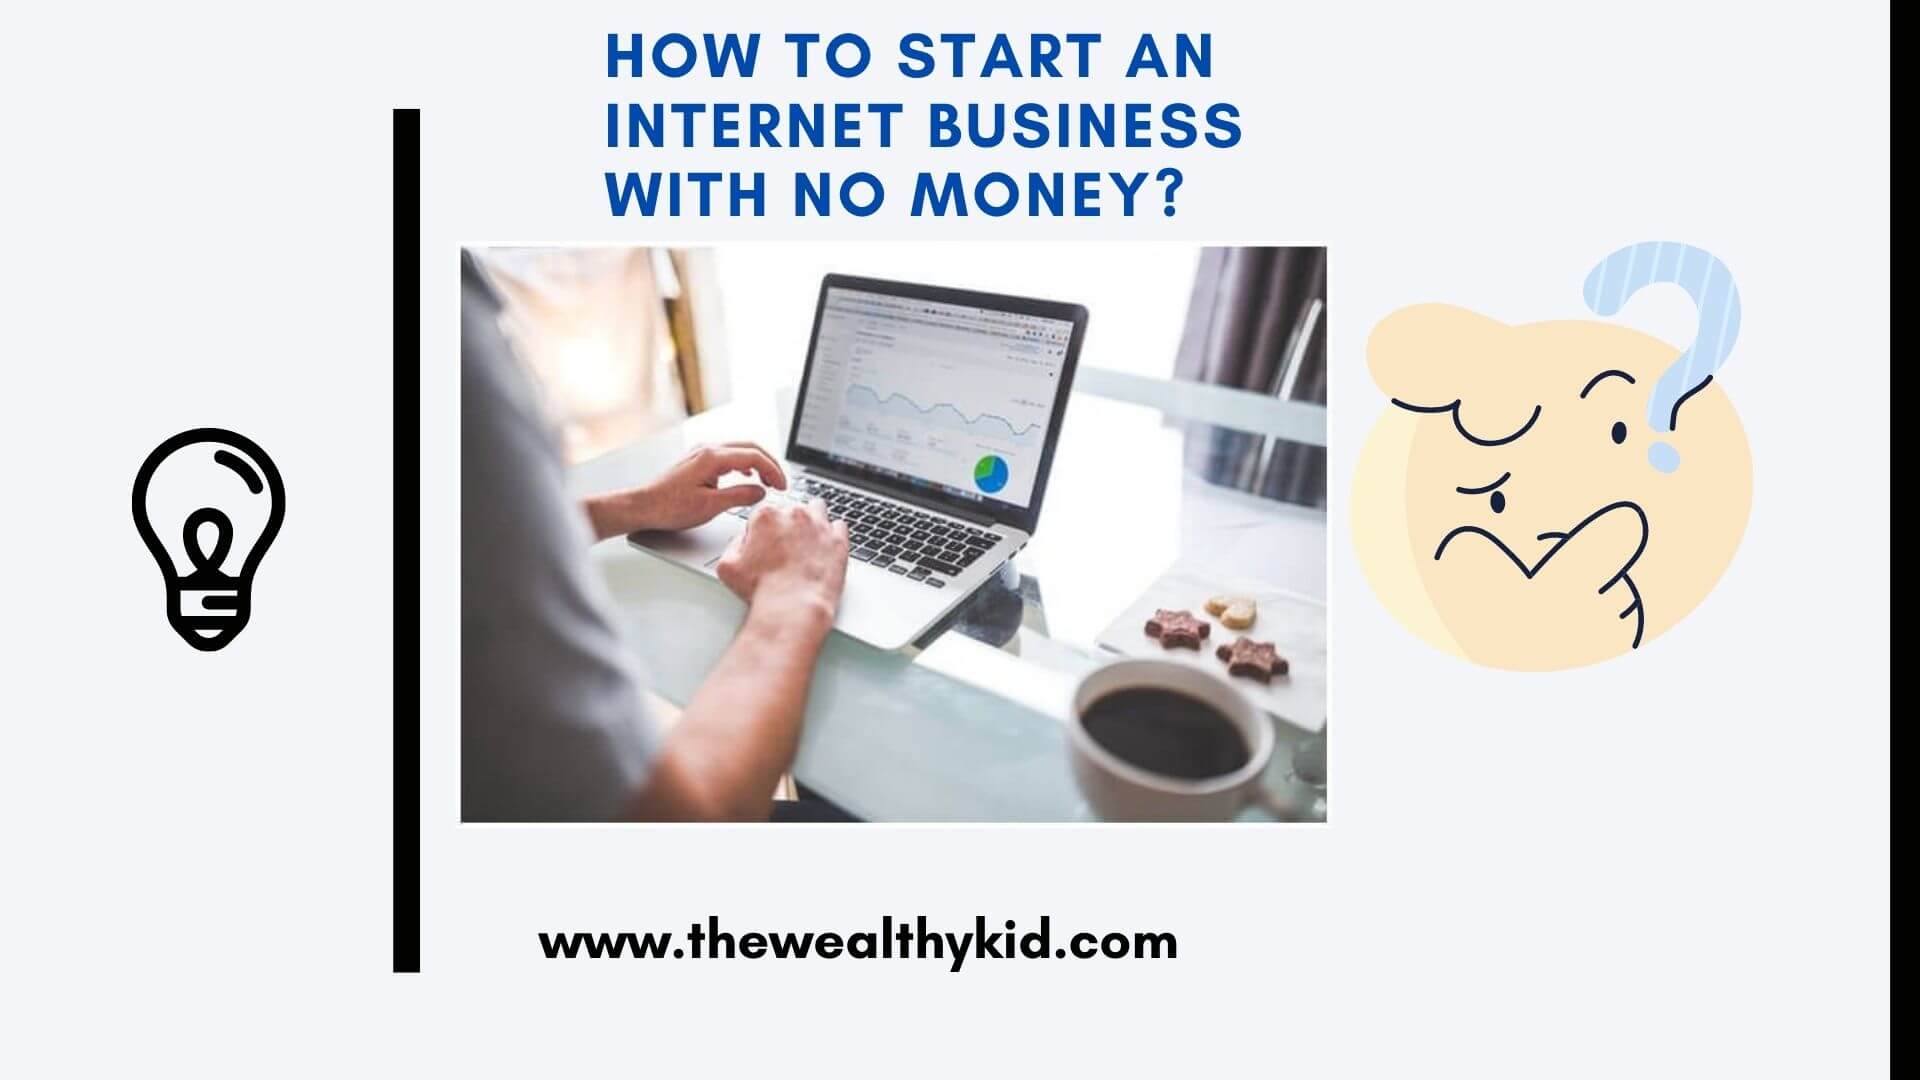 How to start an internet business with no money - Featured Image